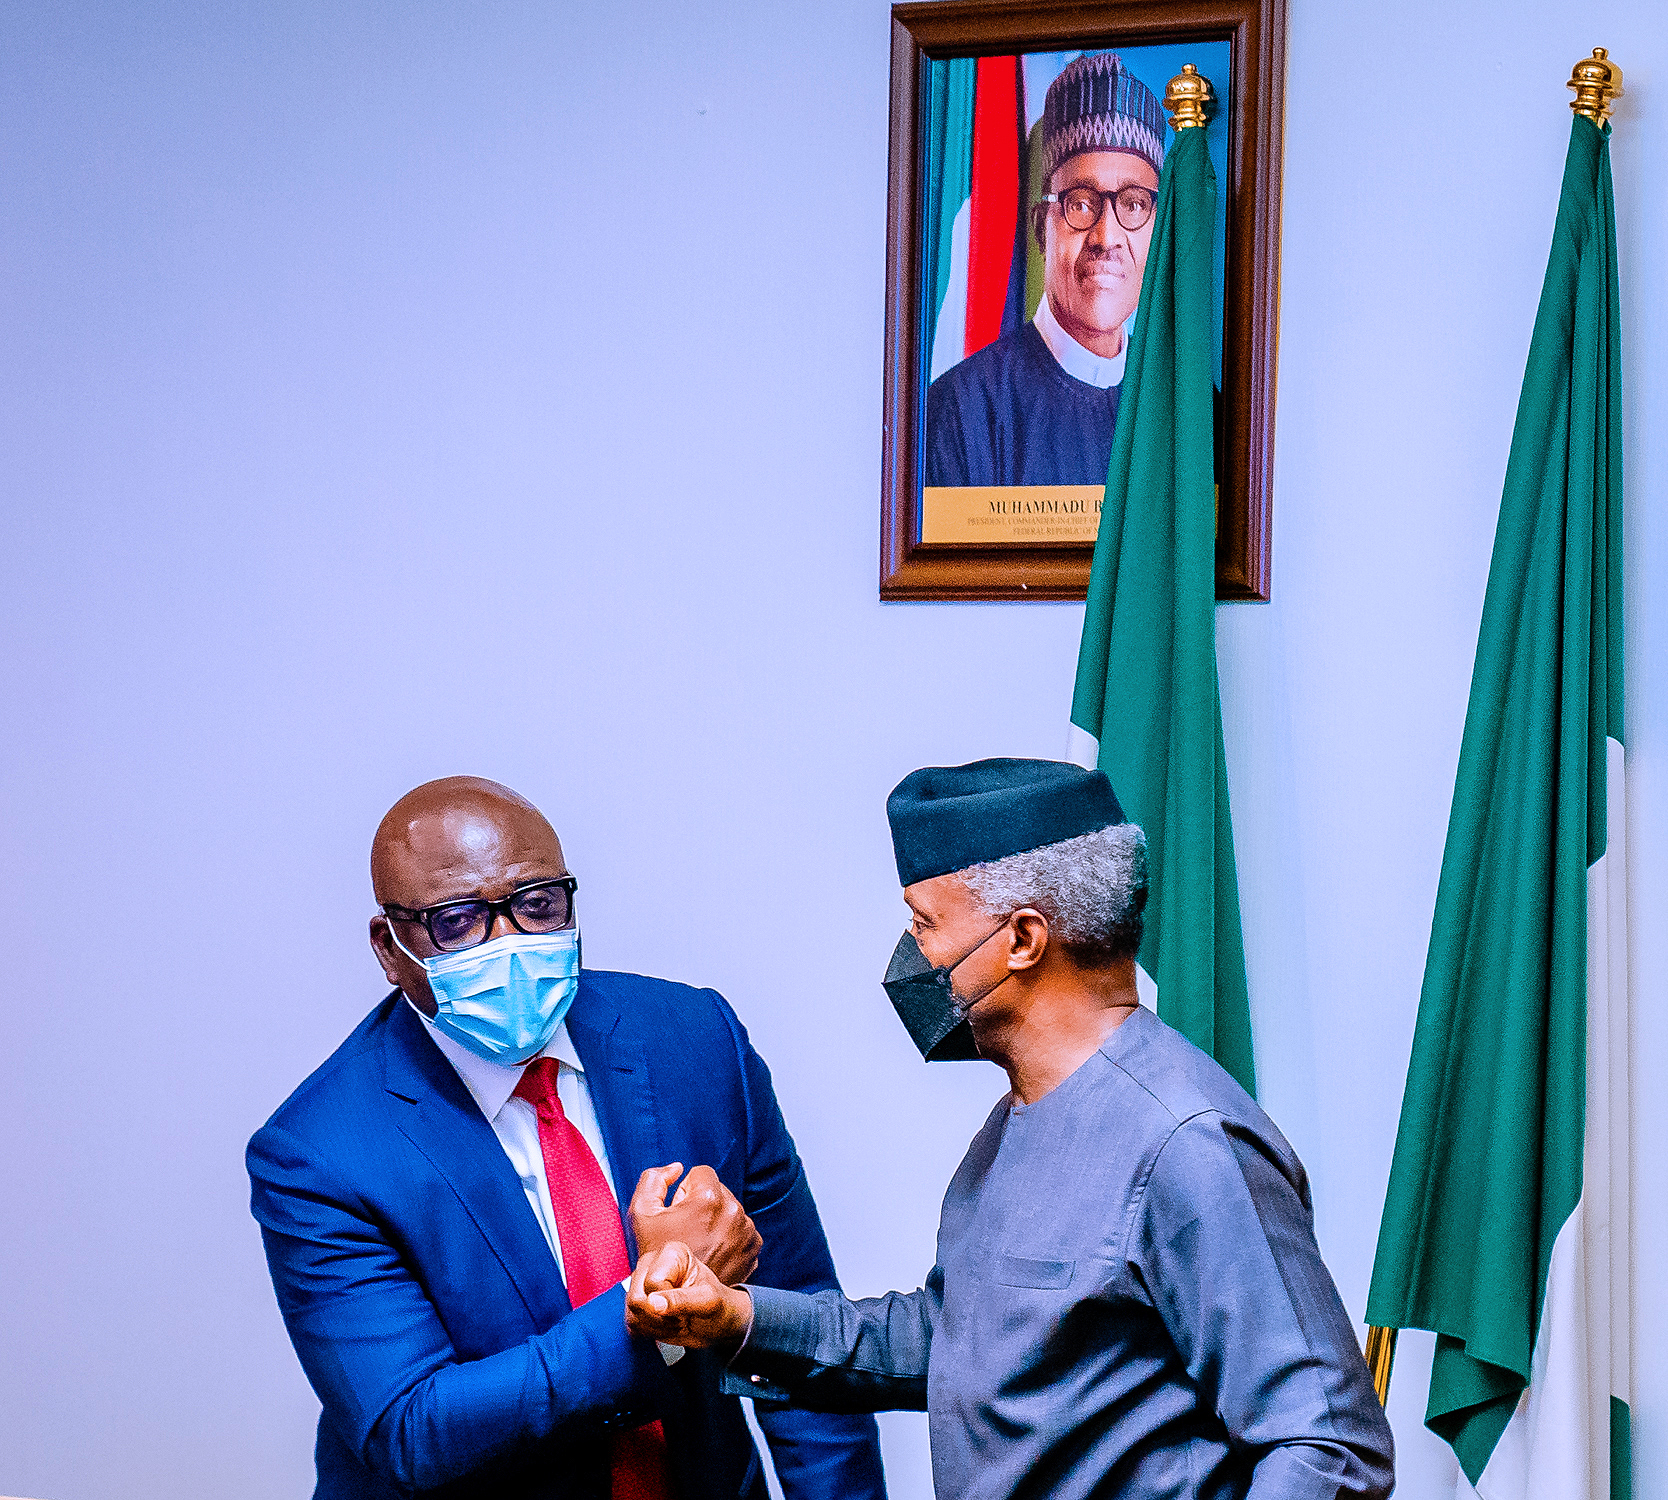 VP Osinbajo Receives Courtesy Visit From Independent Petroleum Producers Group (IPPG) On 20/09/2021